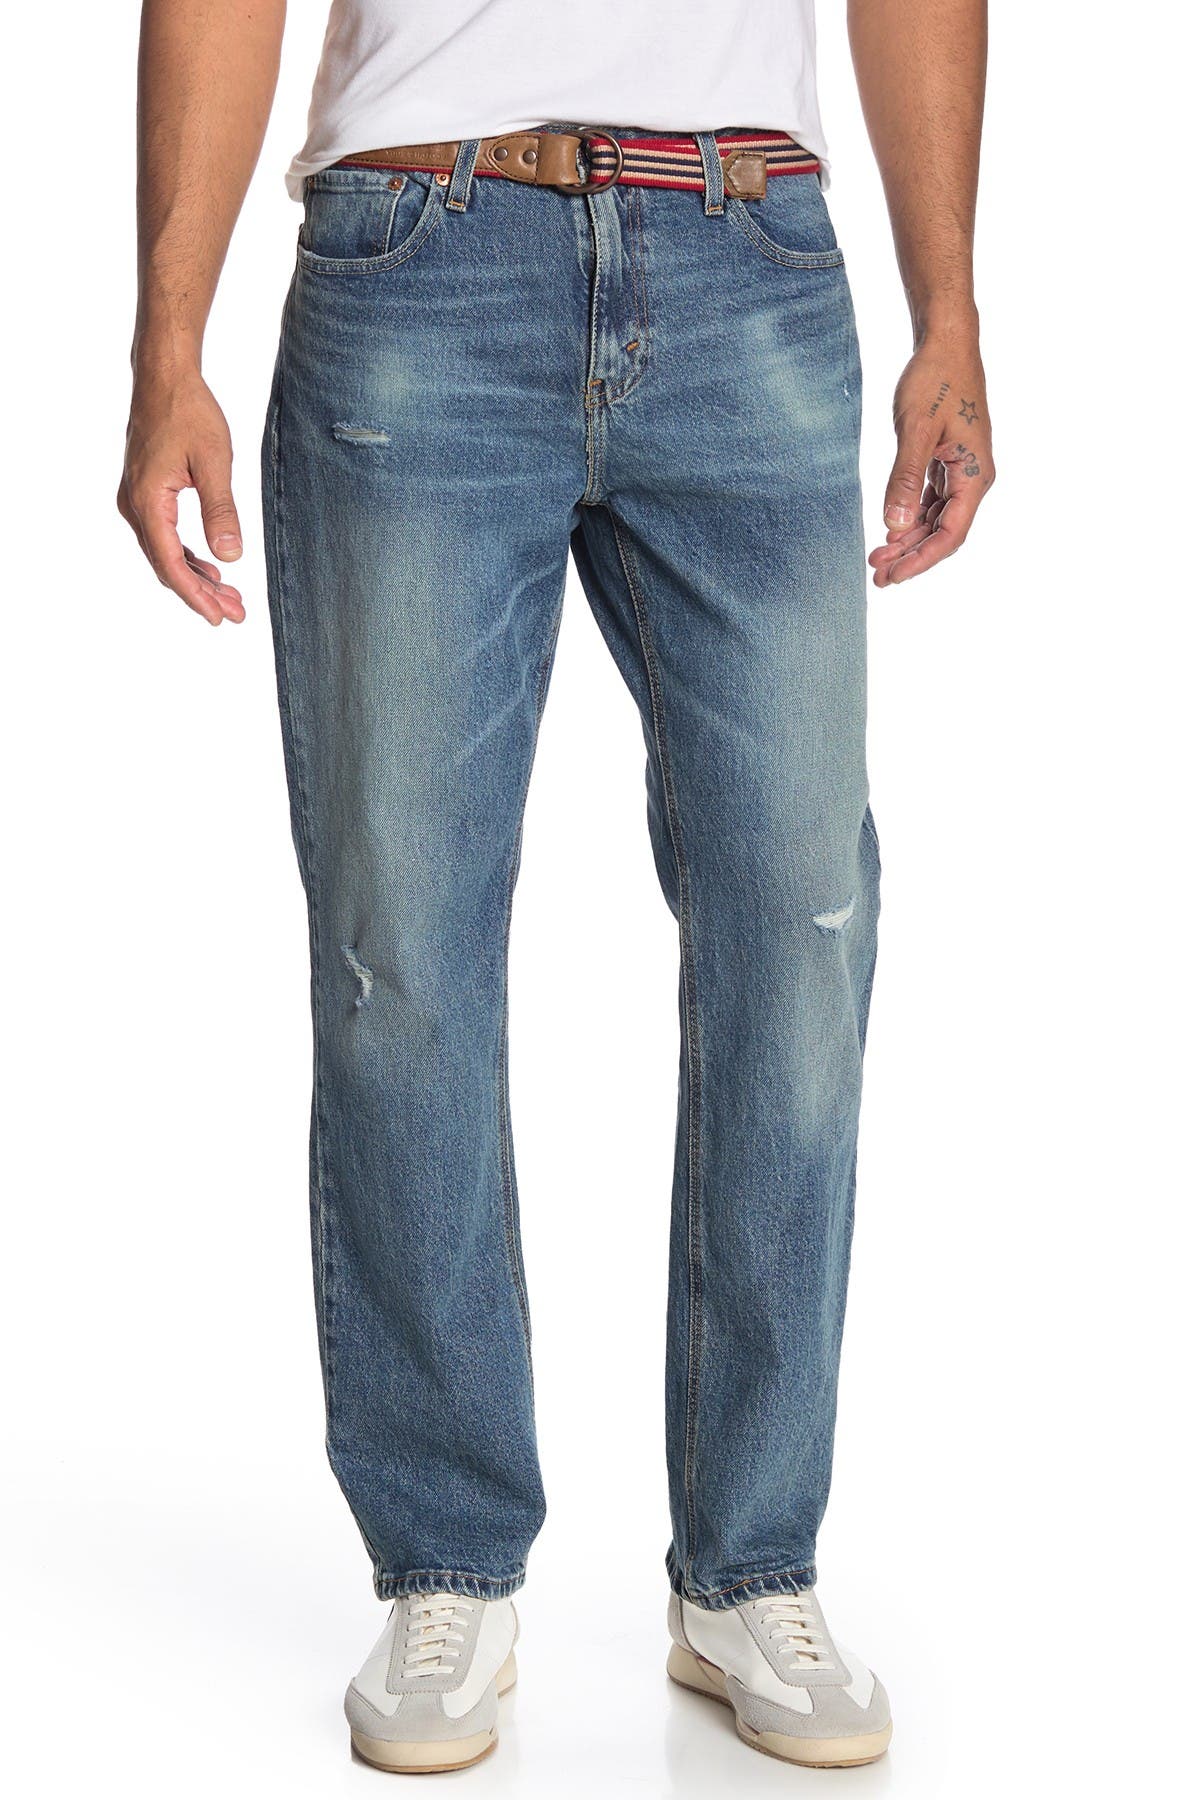 levi's 541 athletic taper jeans